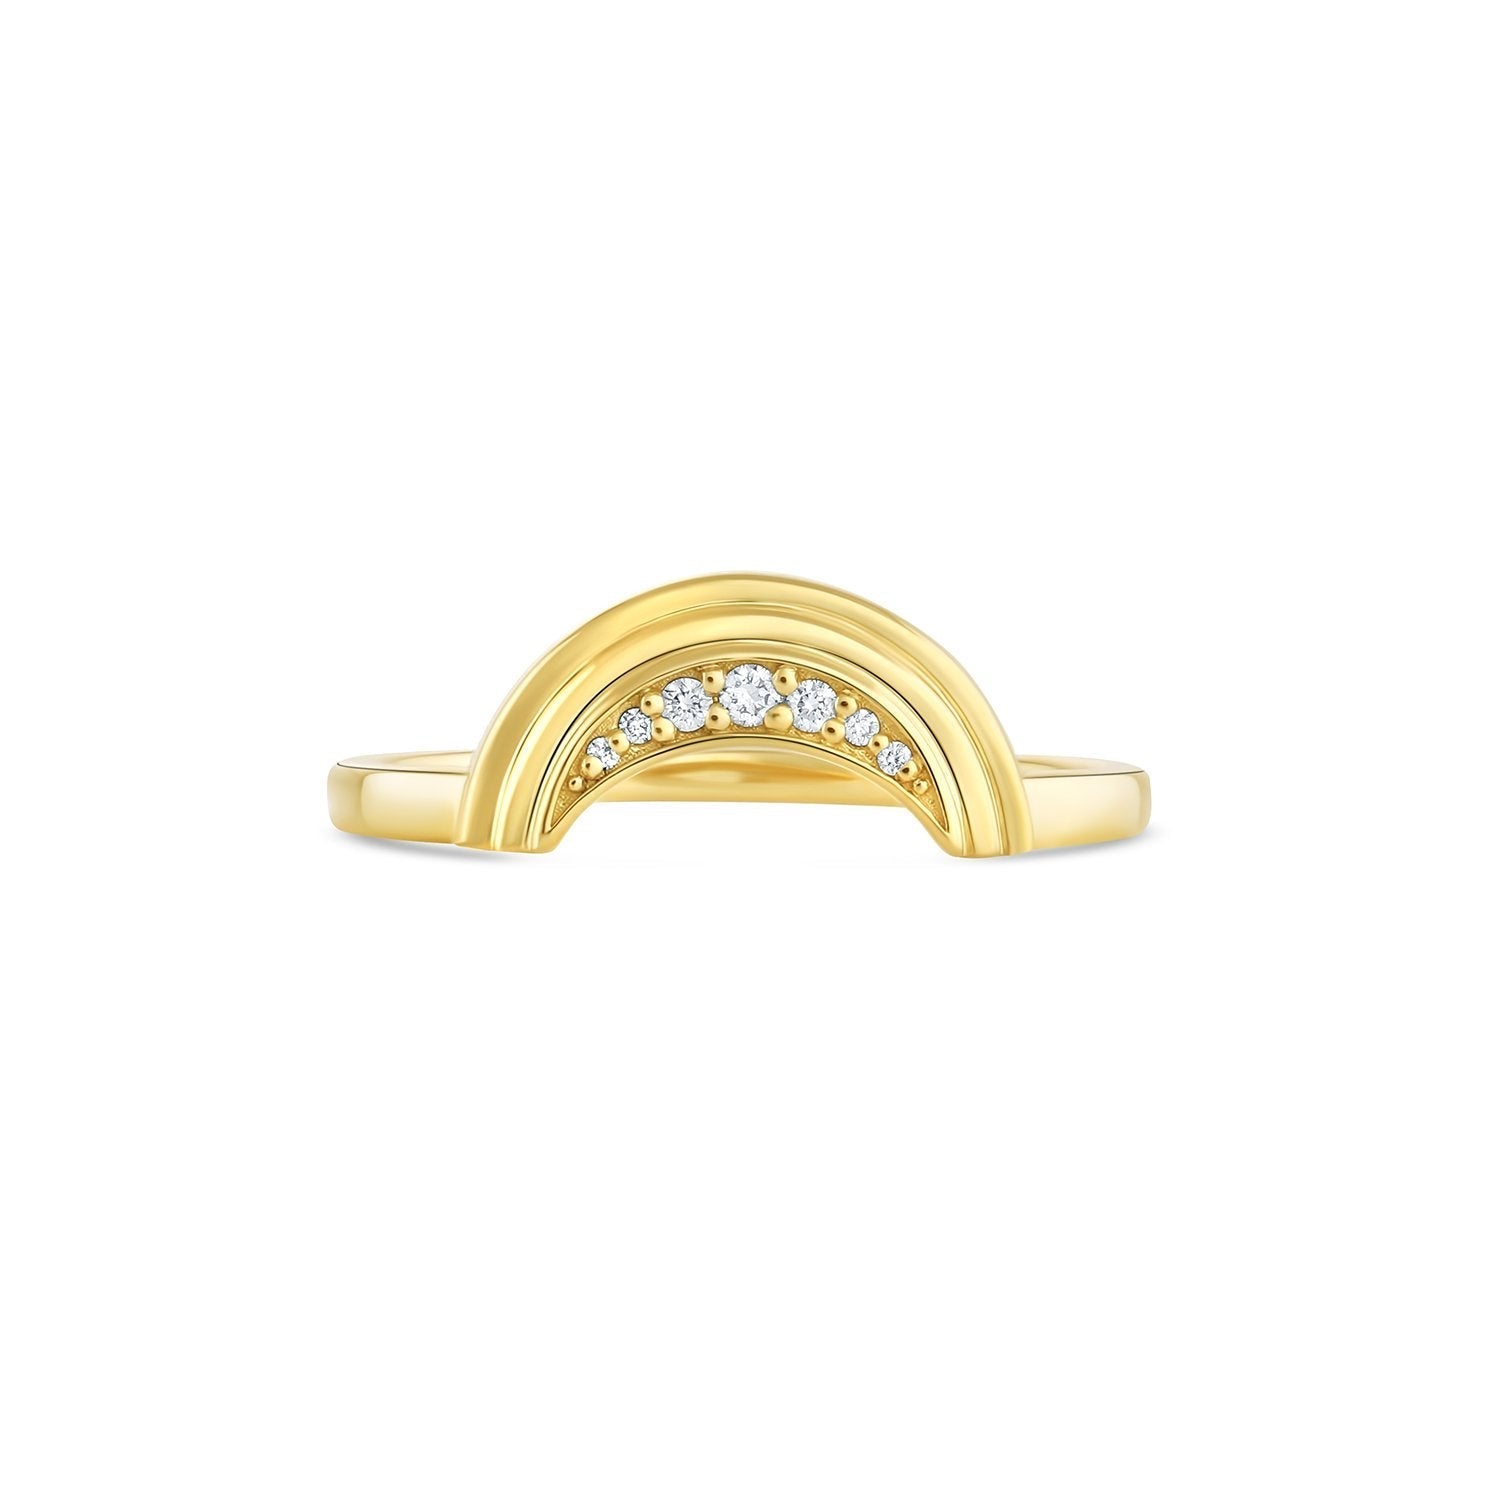 midheaven collection ring suite Mare Nubium Spinel Ring Suite